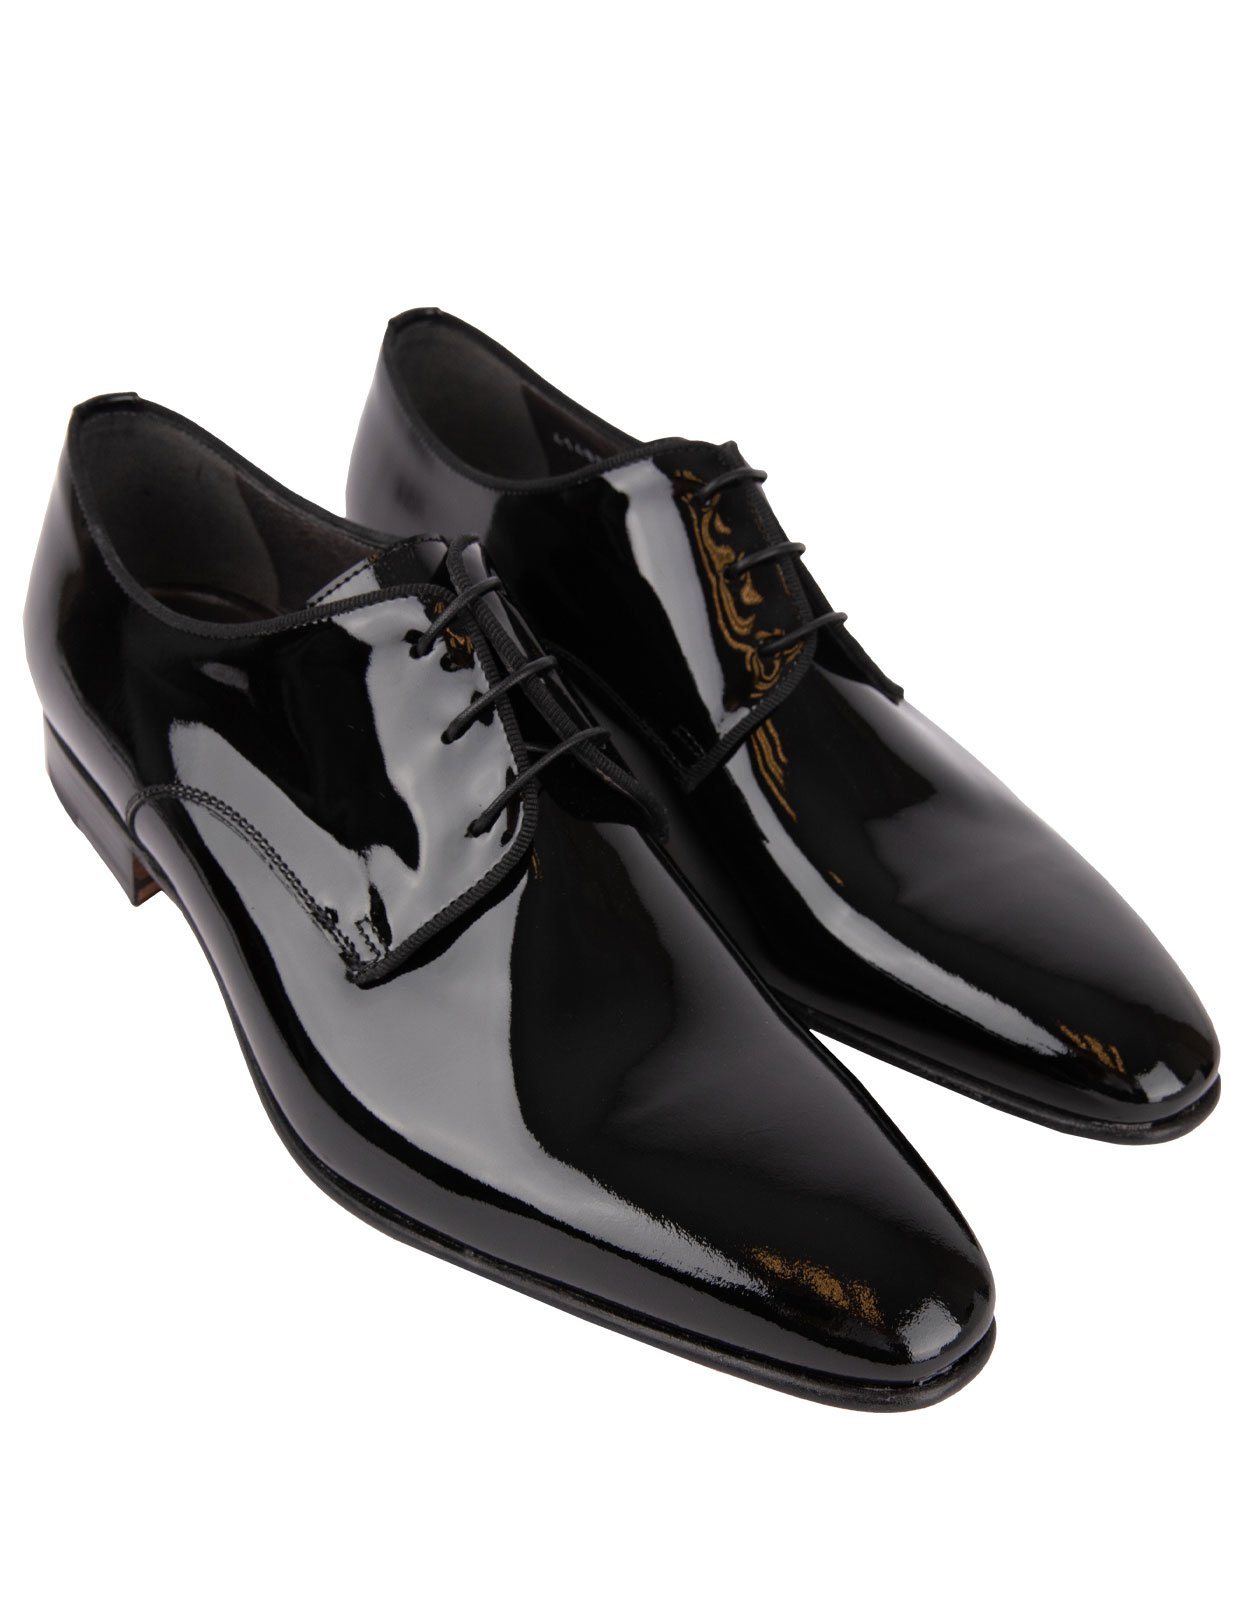 Lille Patent Leather Derby Shoes Black Stl 8.5